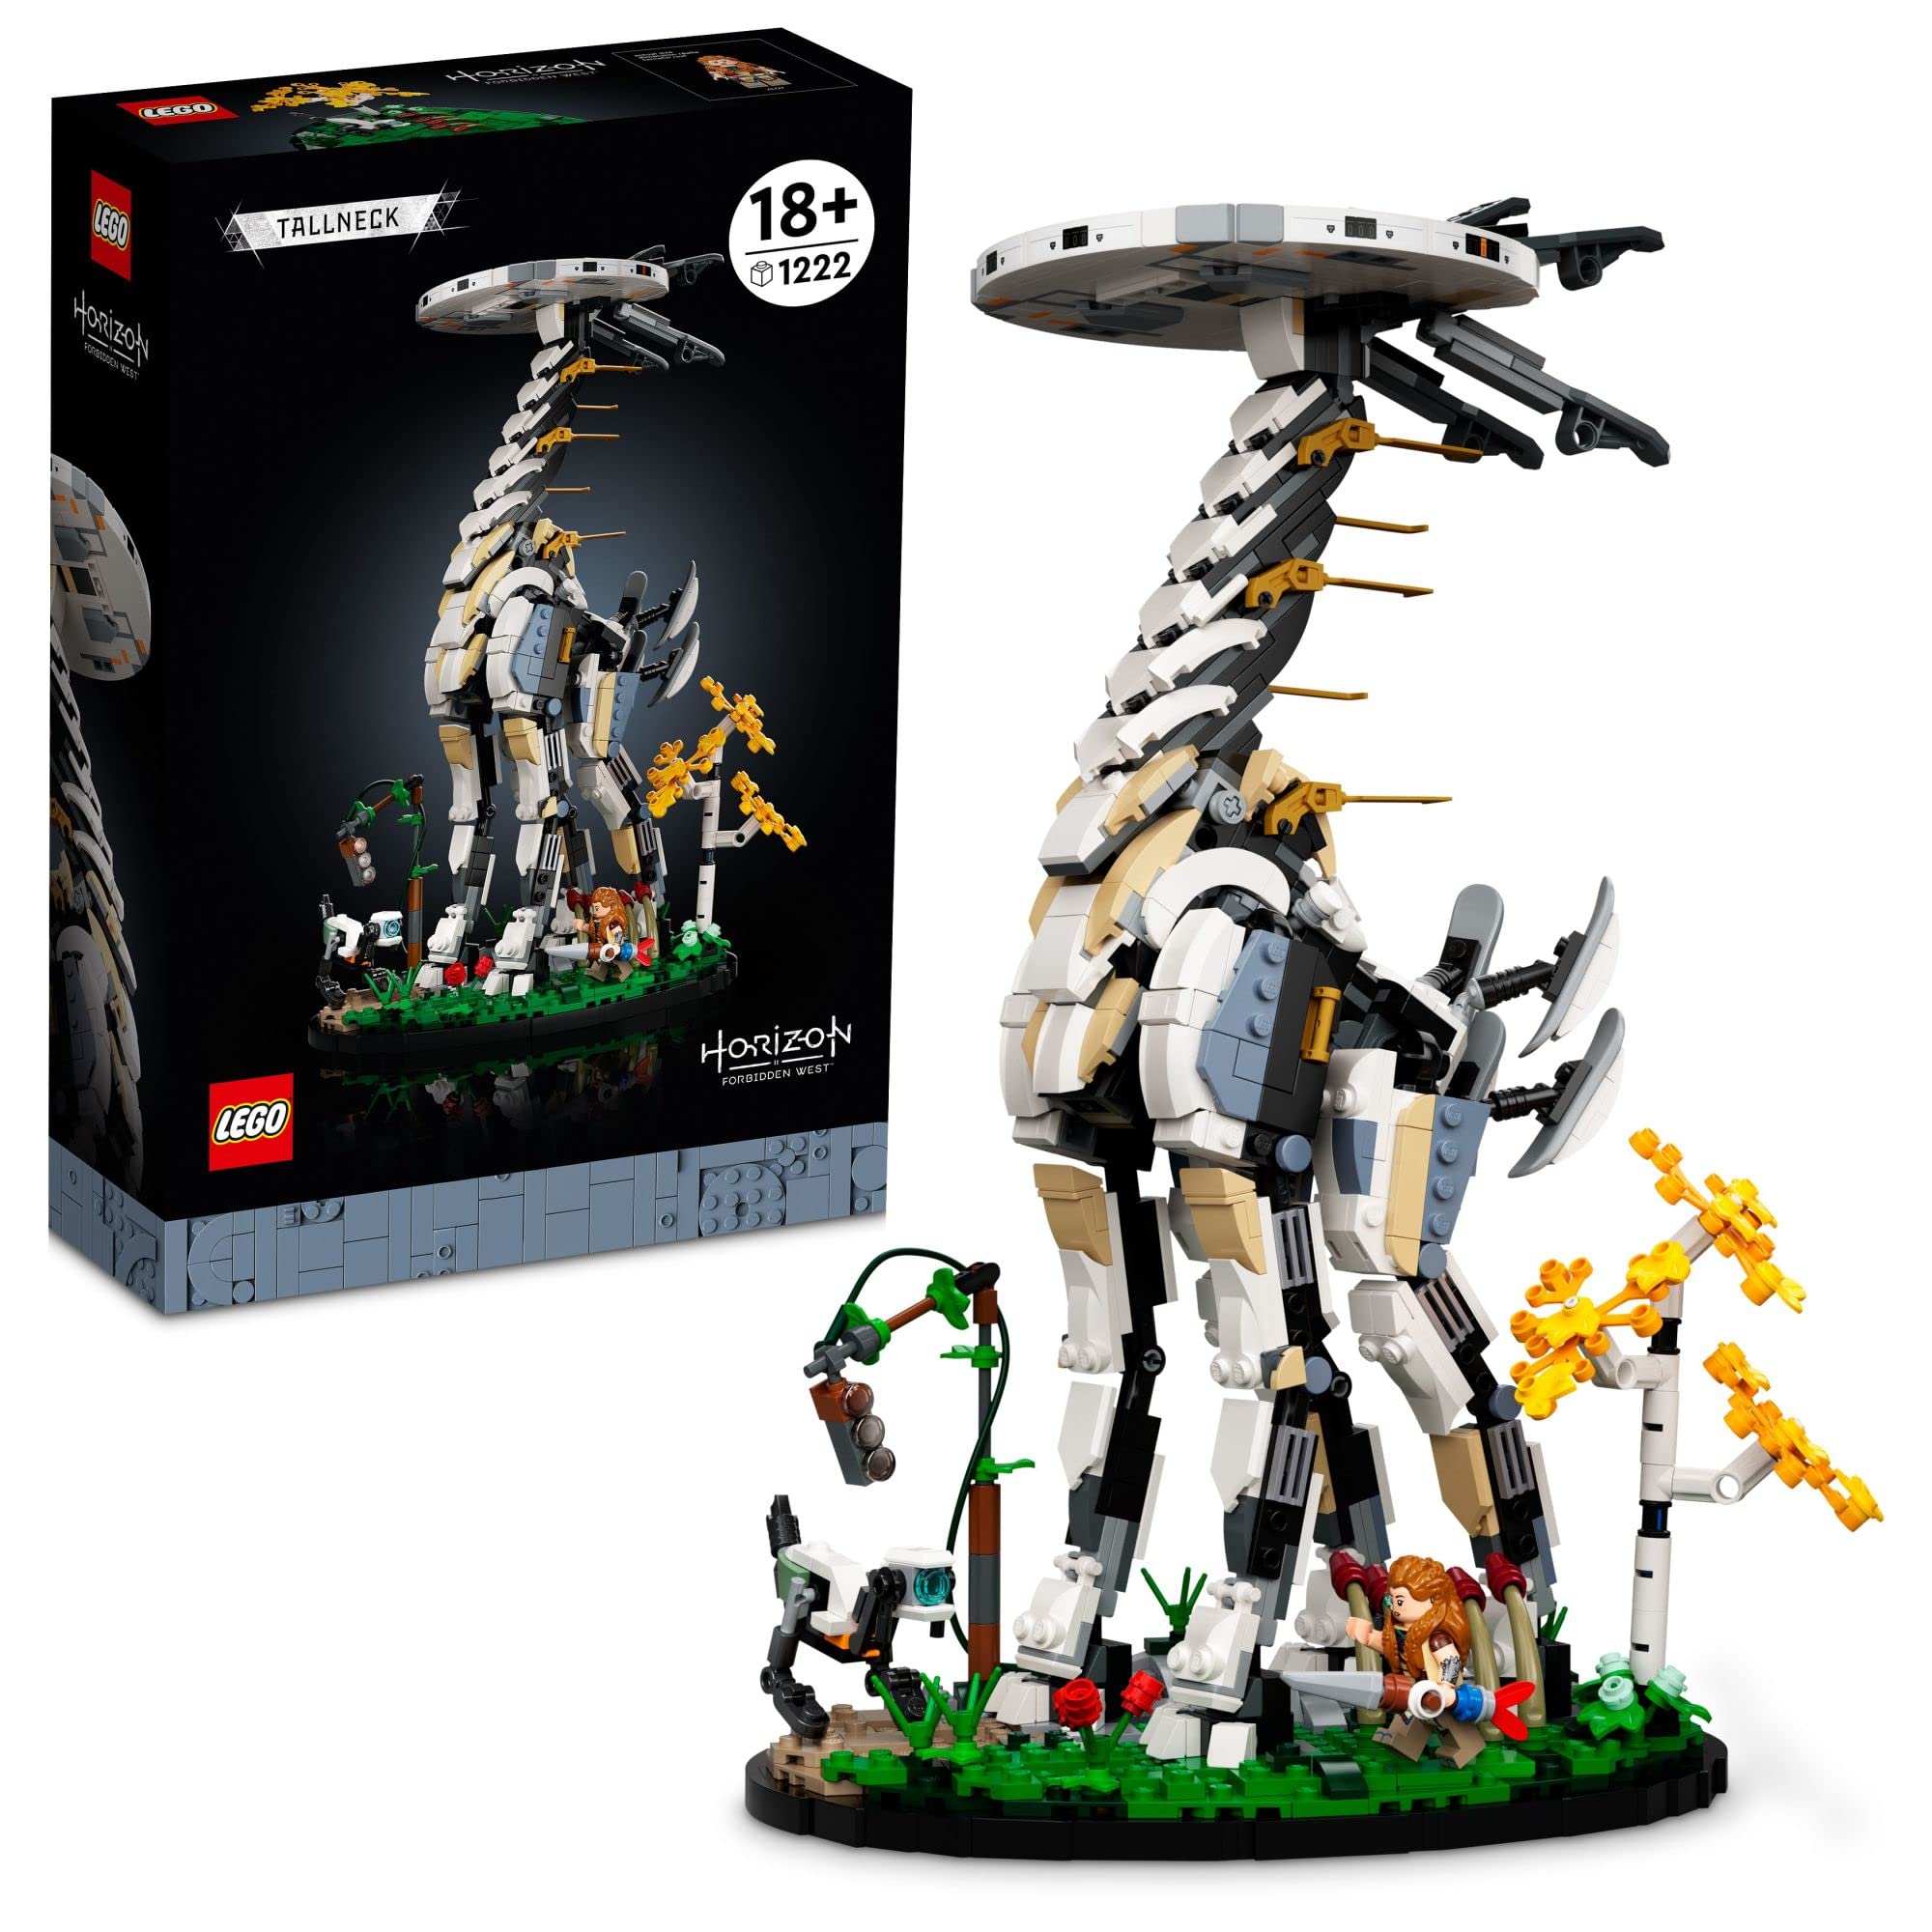 LEGO Horizon Forbidden West: Tallneck 76989 Building Sett; Collectible Gift for Adult Gaming Fans; Model of The Iconic Machine with Display Stand (1,222 Pieces) - $89.99 at Amazon